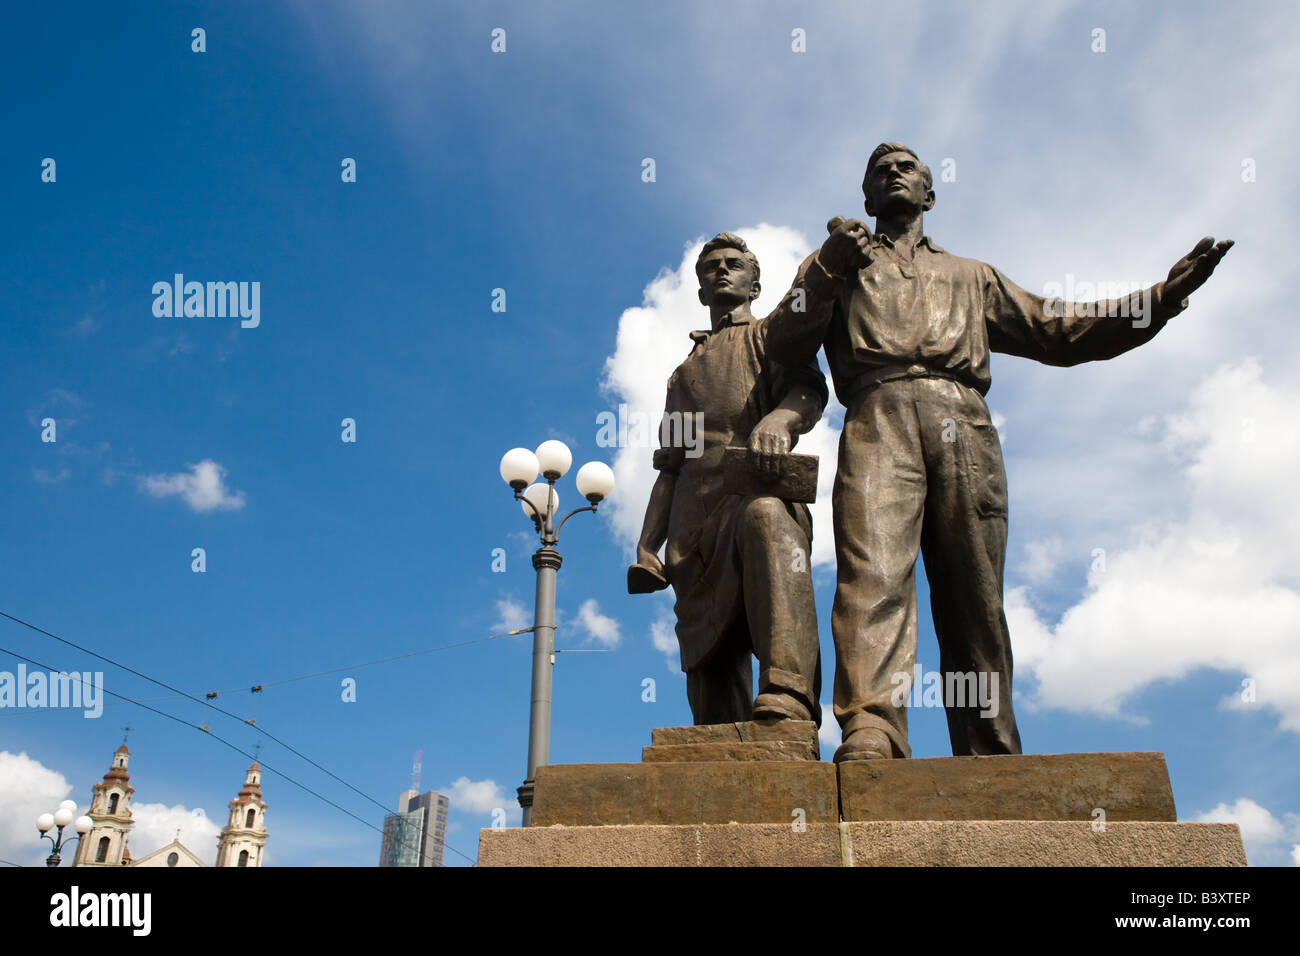 Two bronze Social Realism sculptures gesture boldly before buildings and a blue sky in Vilnius Lithuania on the Green Bridge. Stock Photo